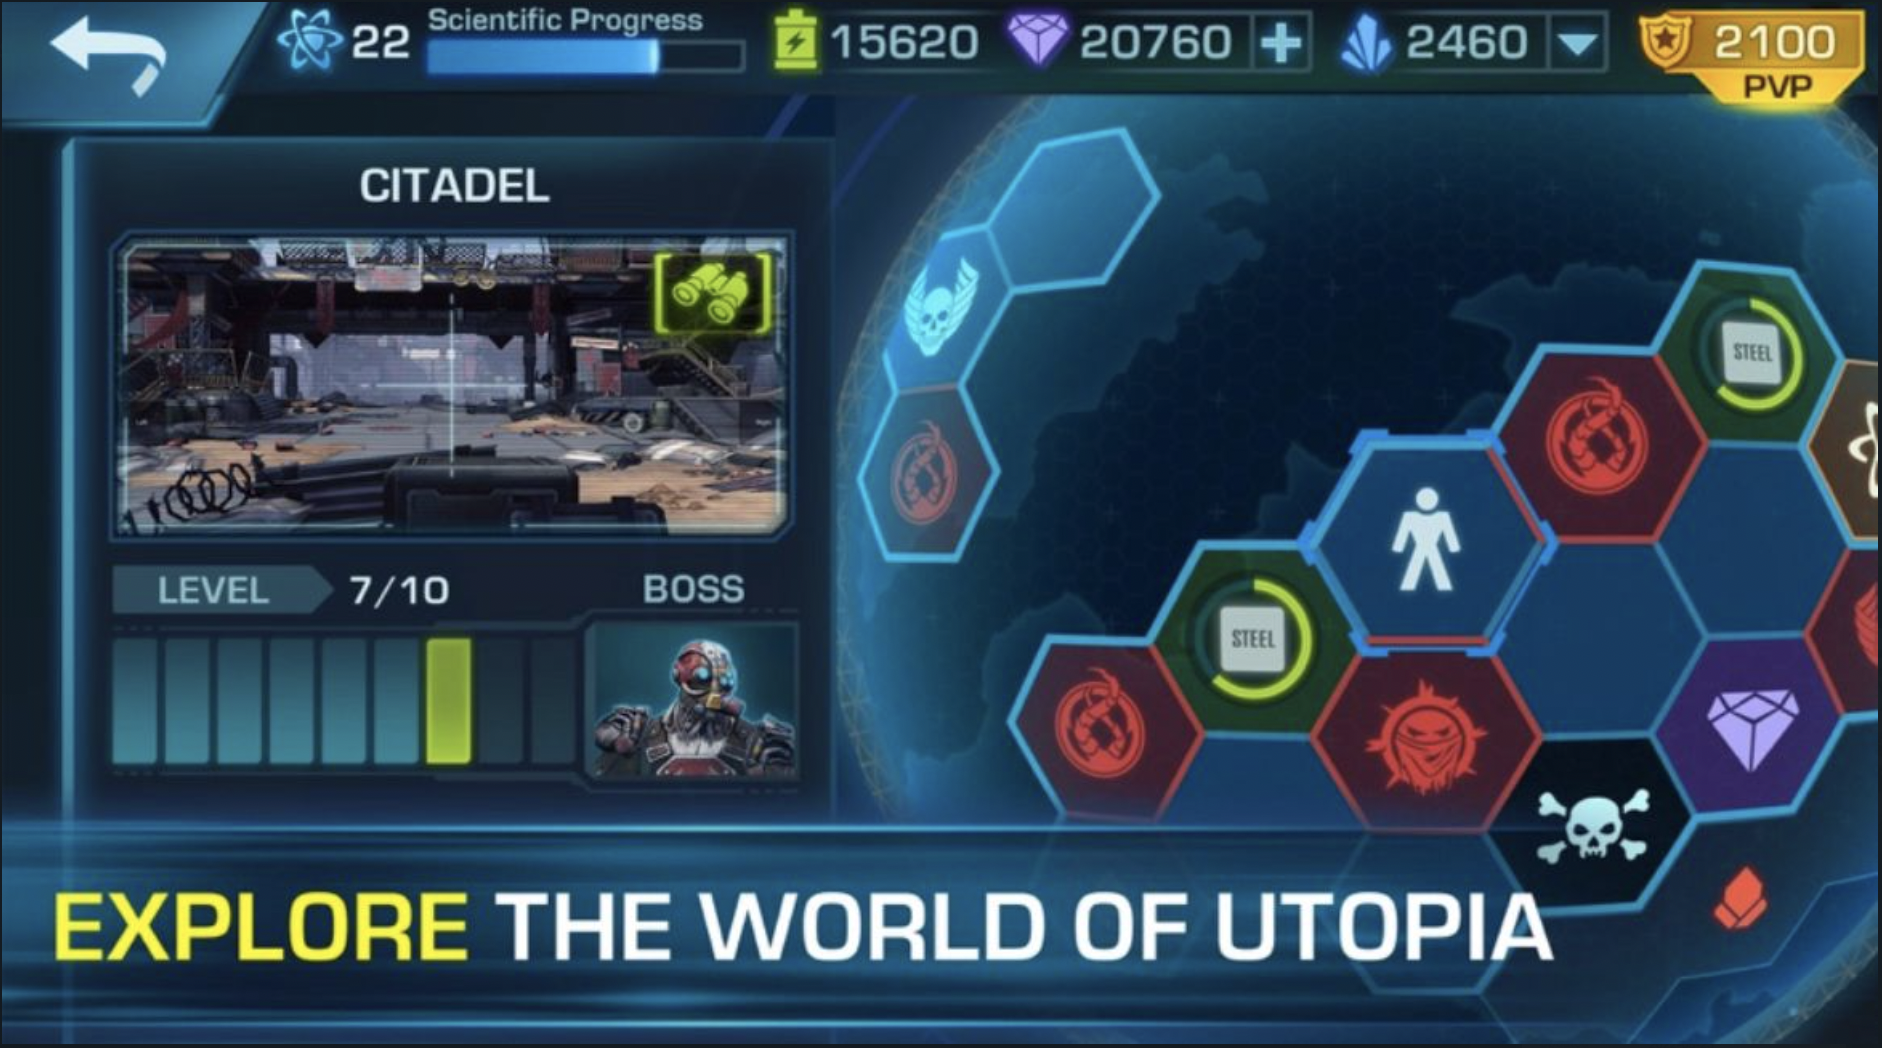 Evolution 2: Battle for Utopia Hack Free Download on iOS